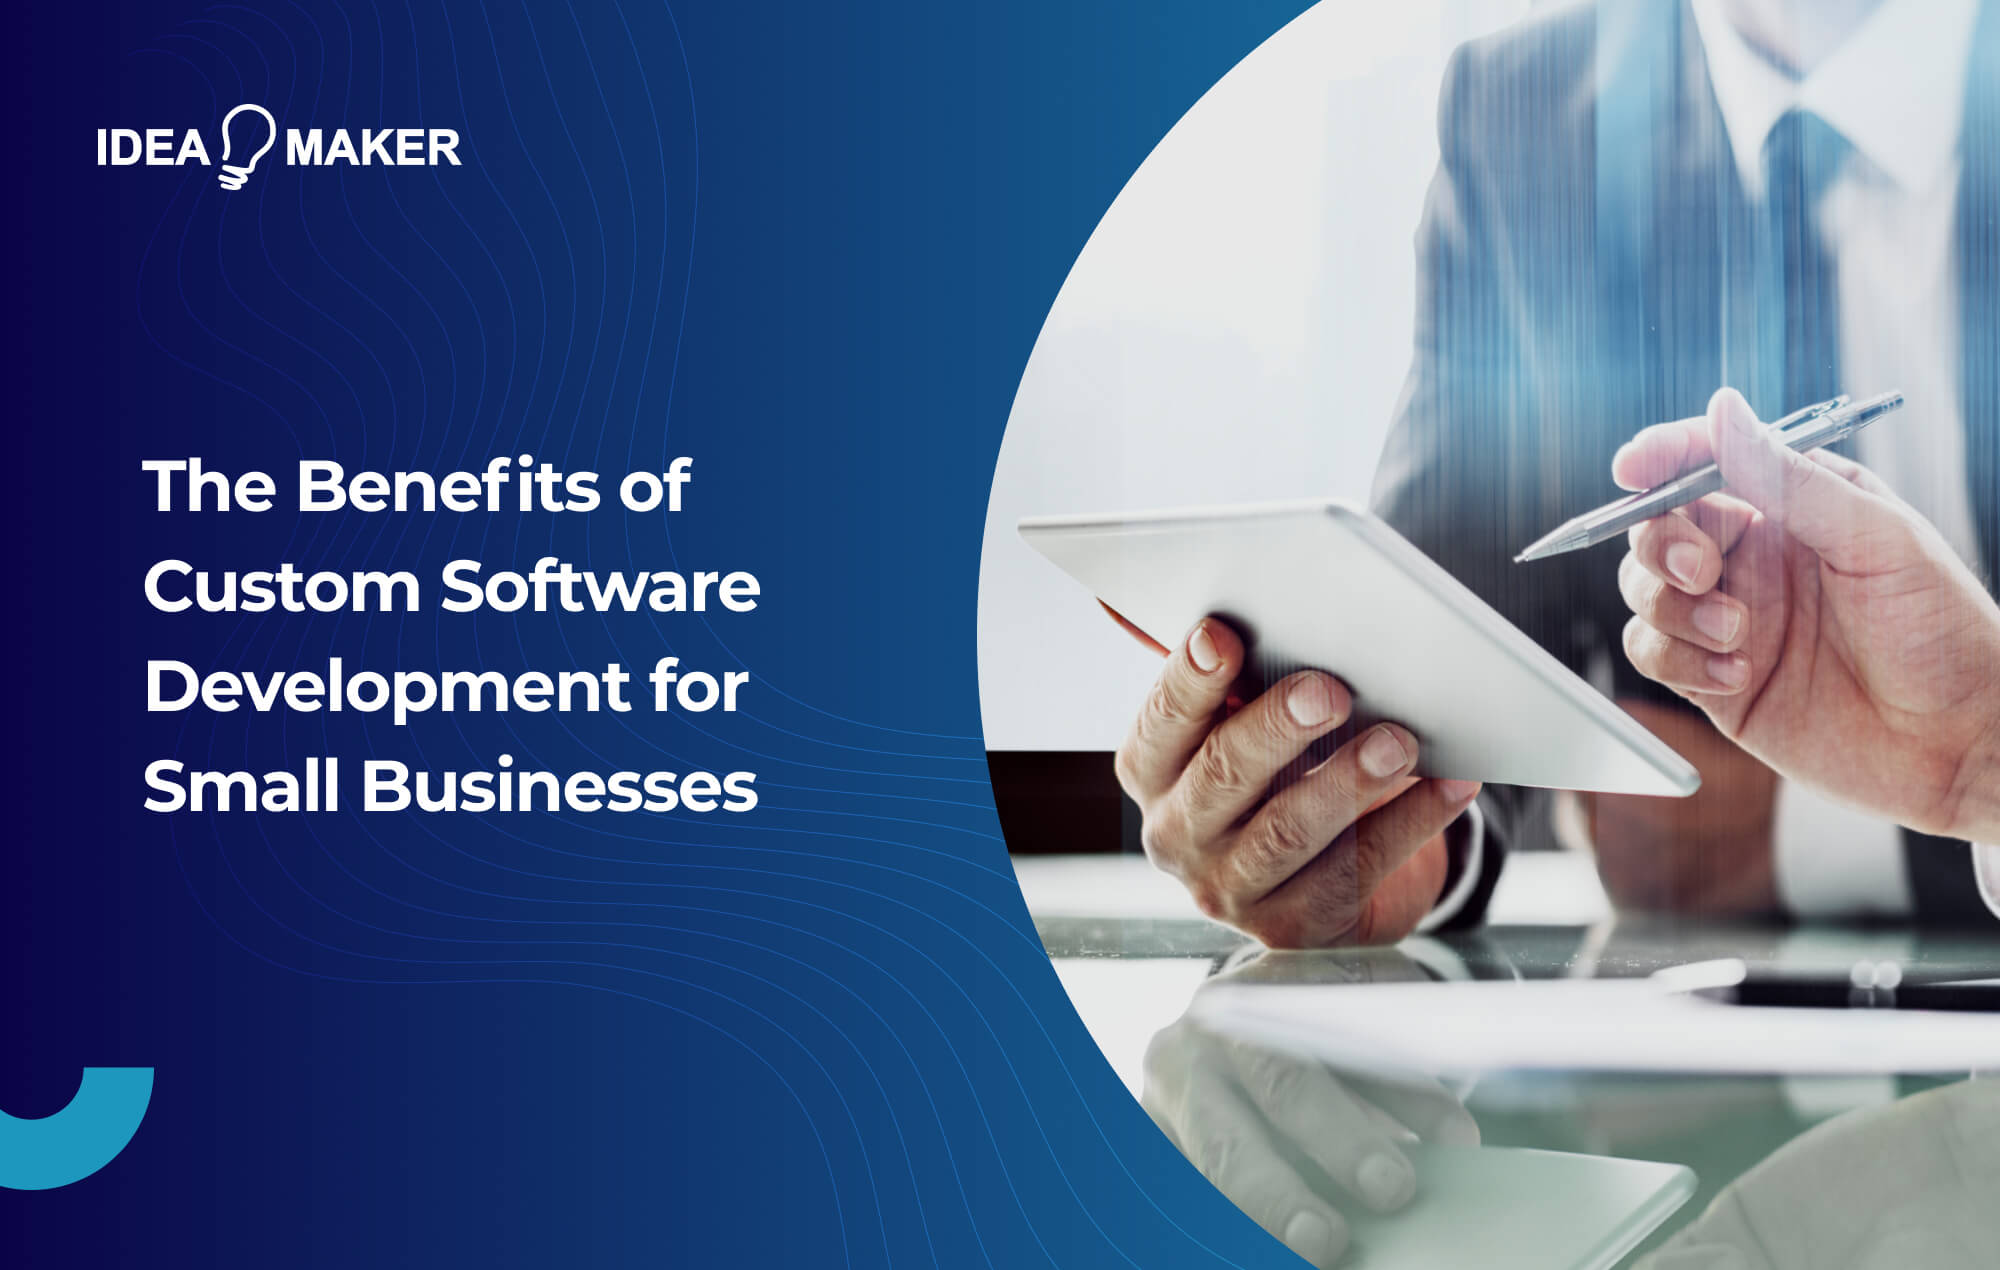 The Benefits of Custom Software Development for Small Businesses